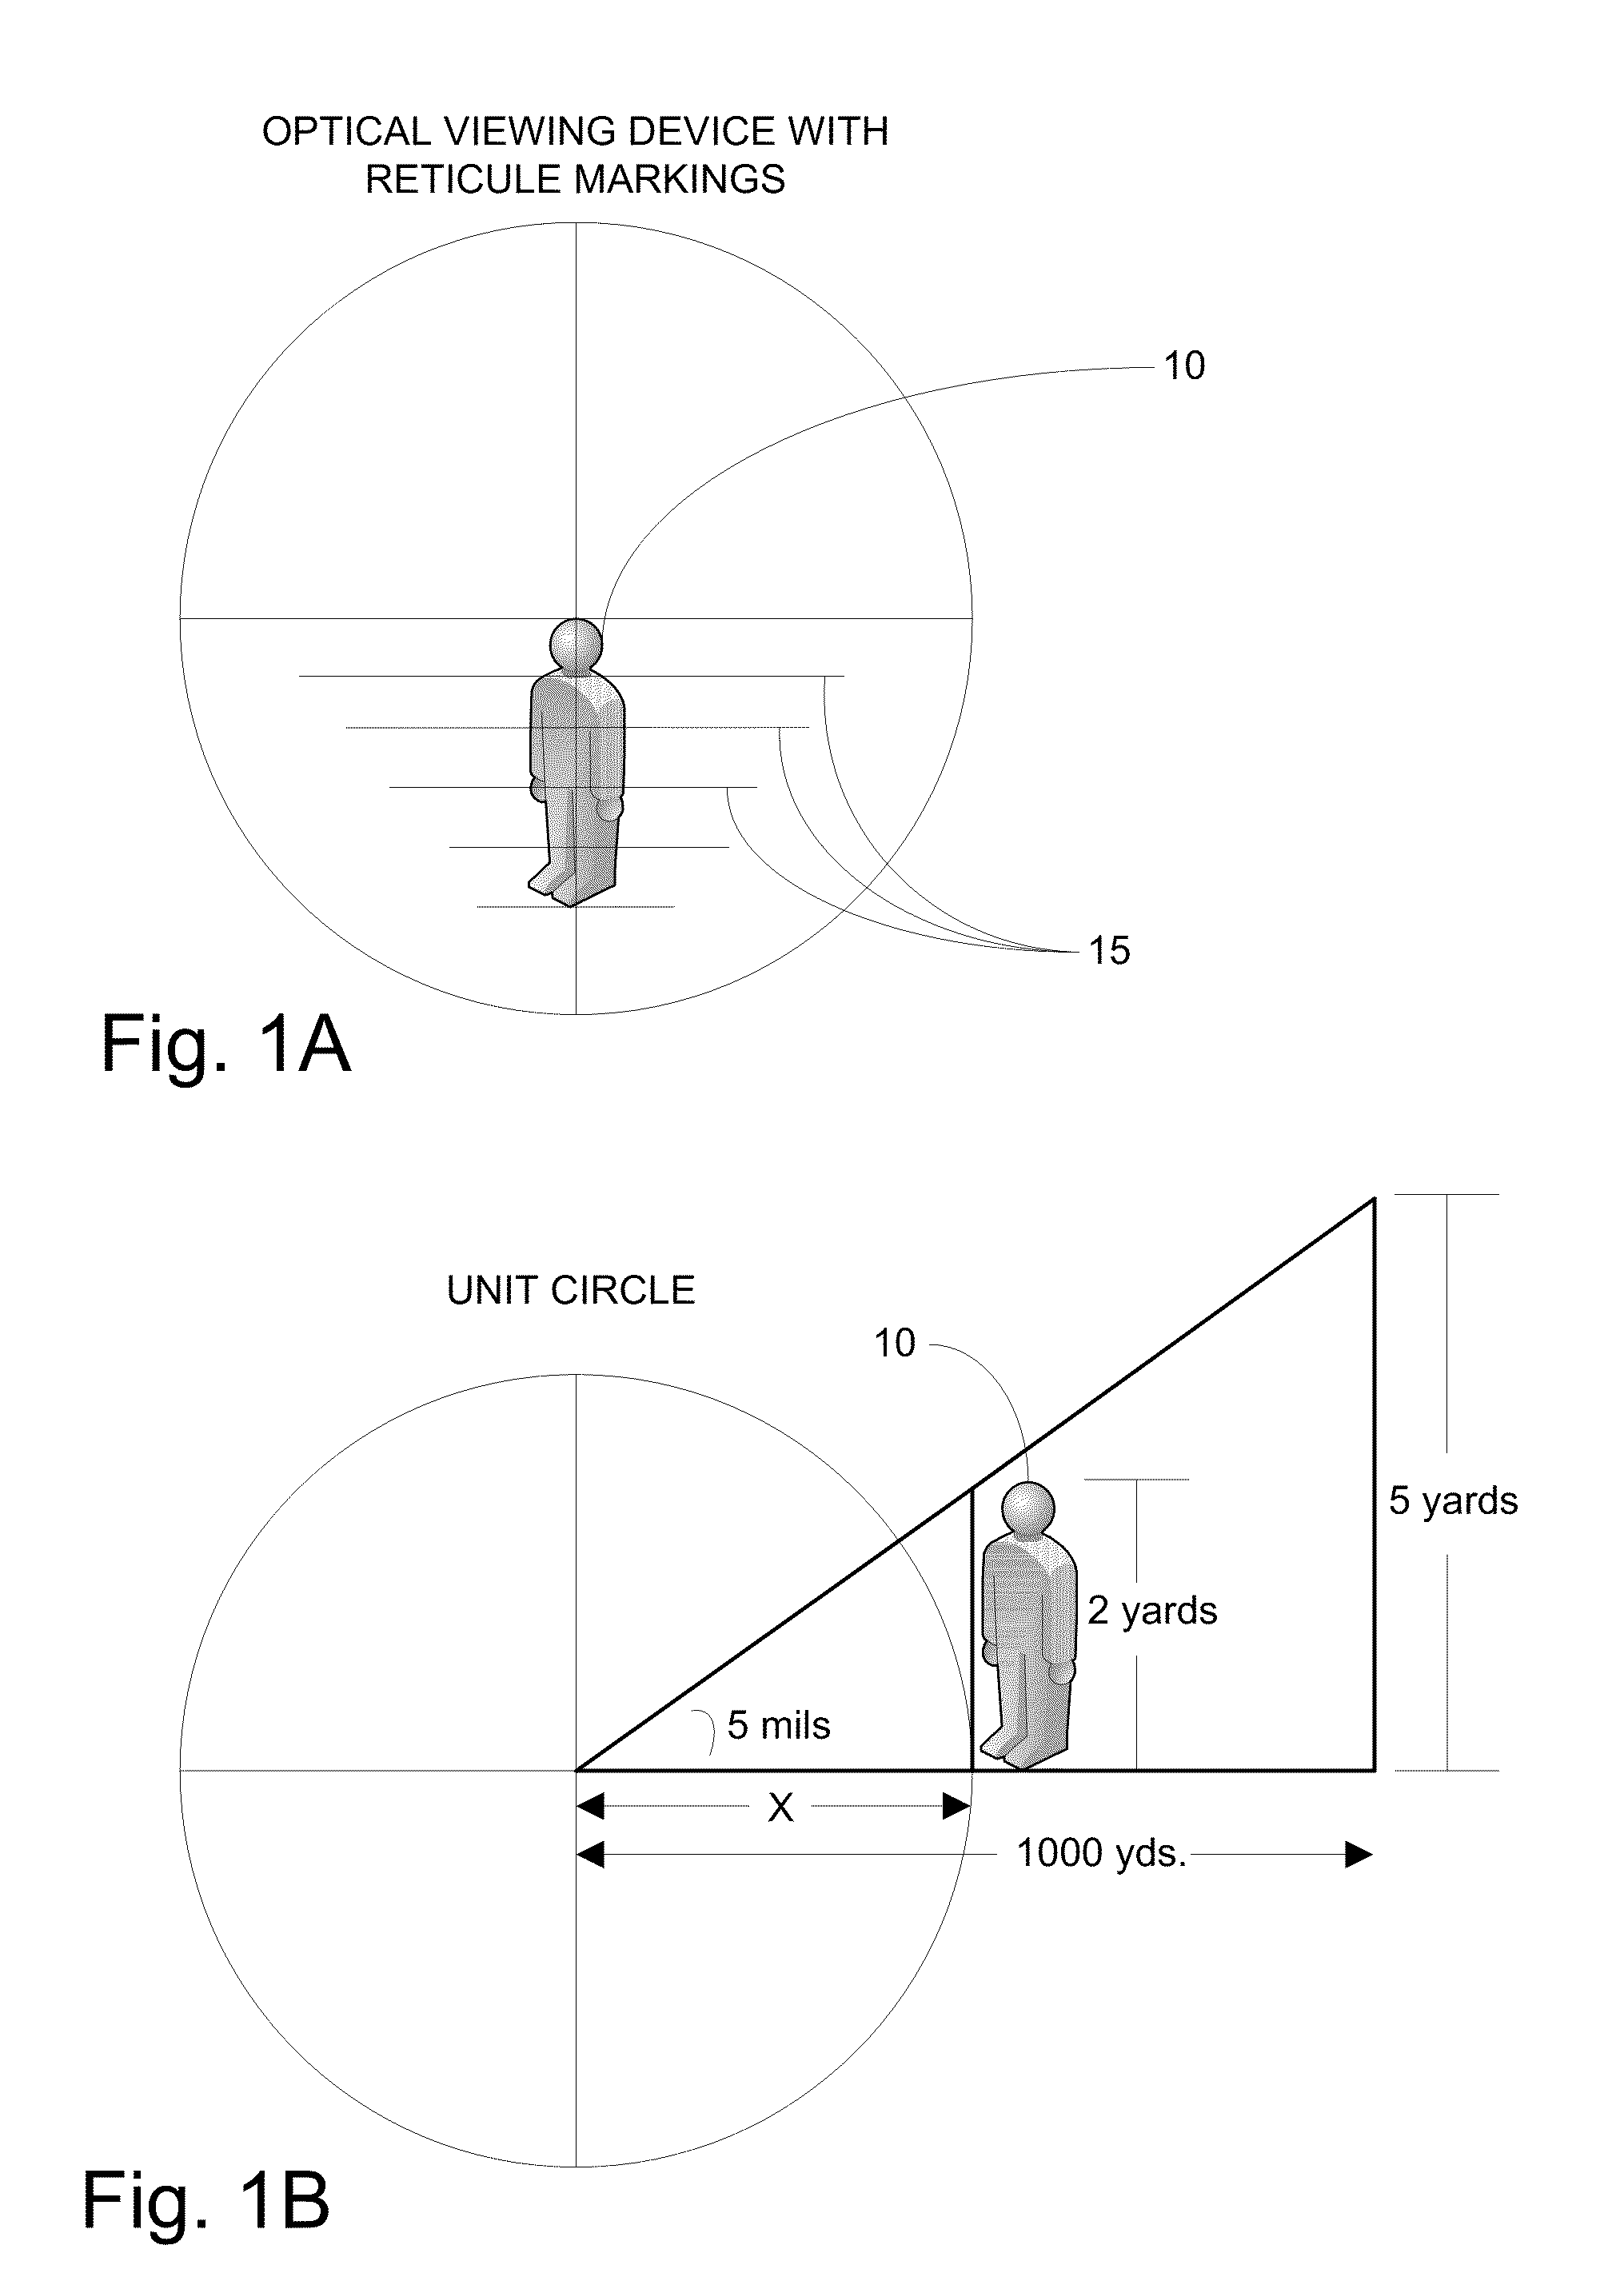 System and Method for Ballistic Solutions